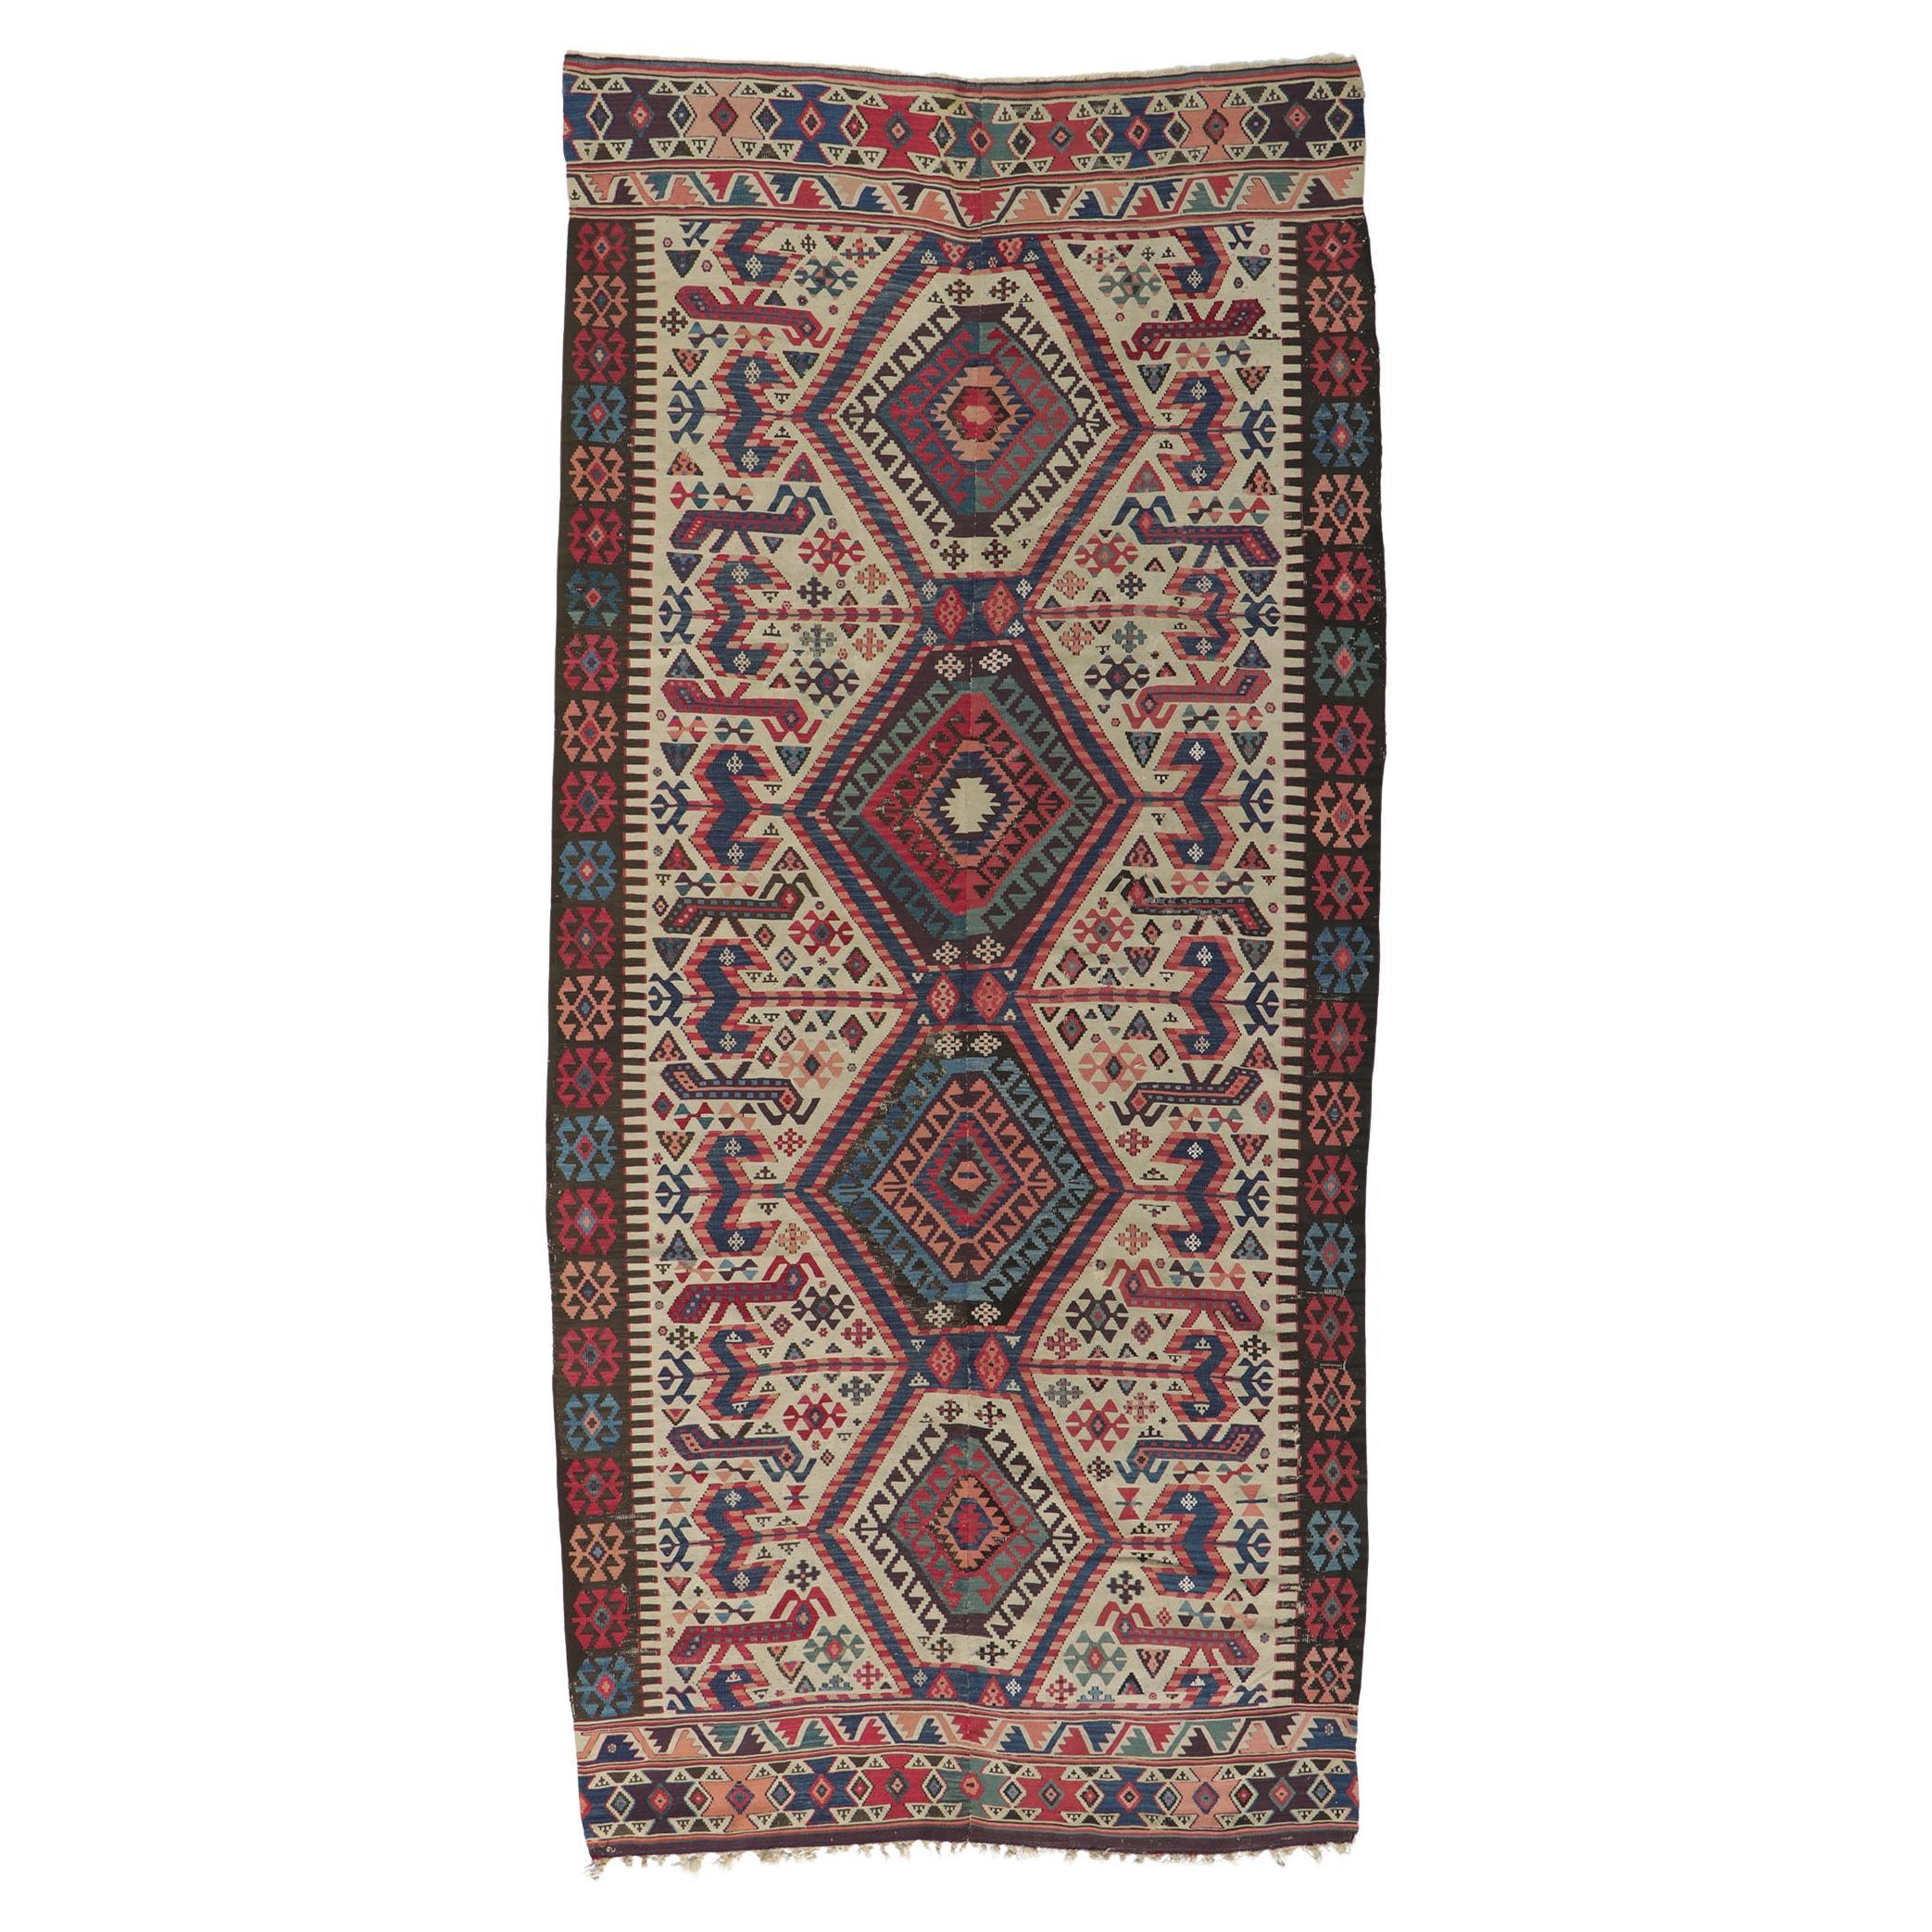 Antique Caucasian Kilim Rug with Tribal Style